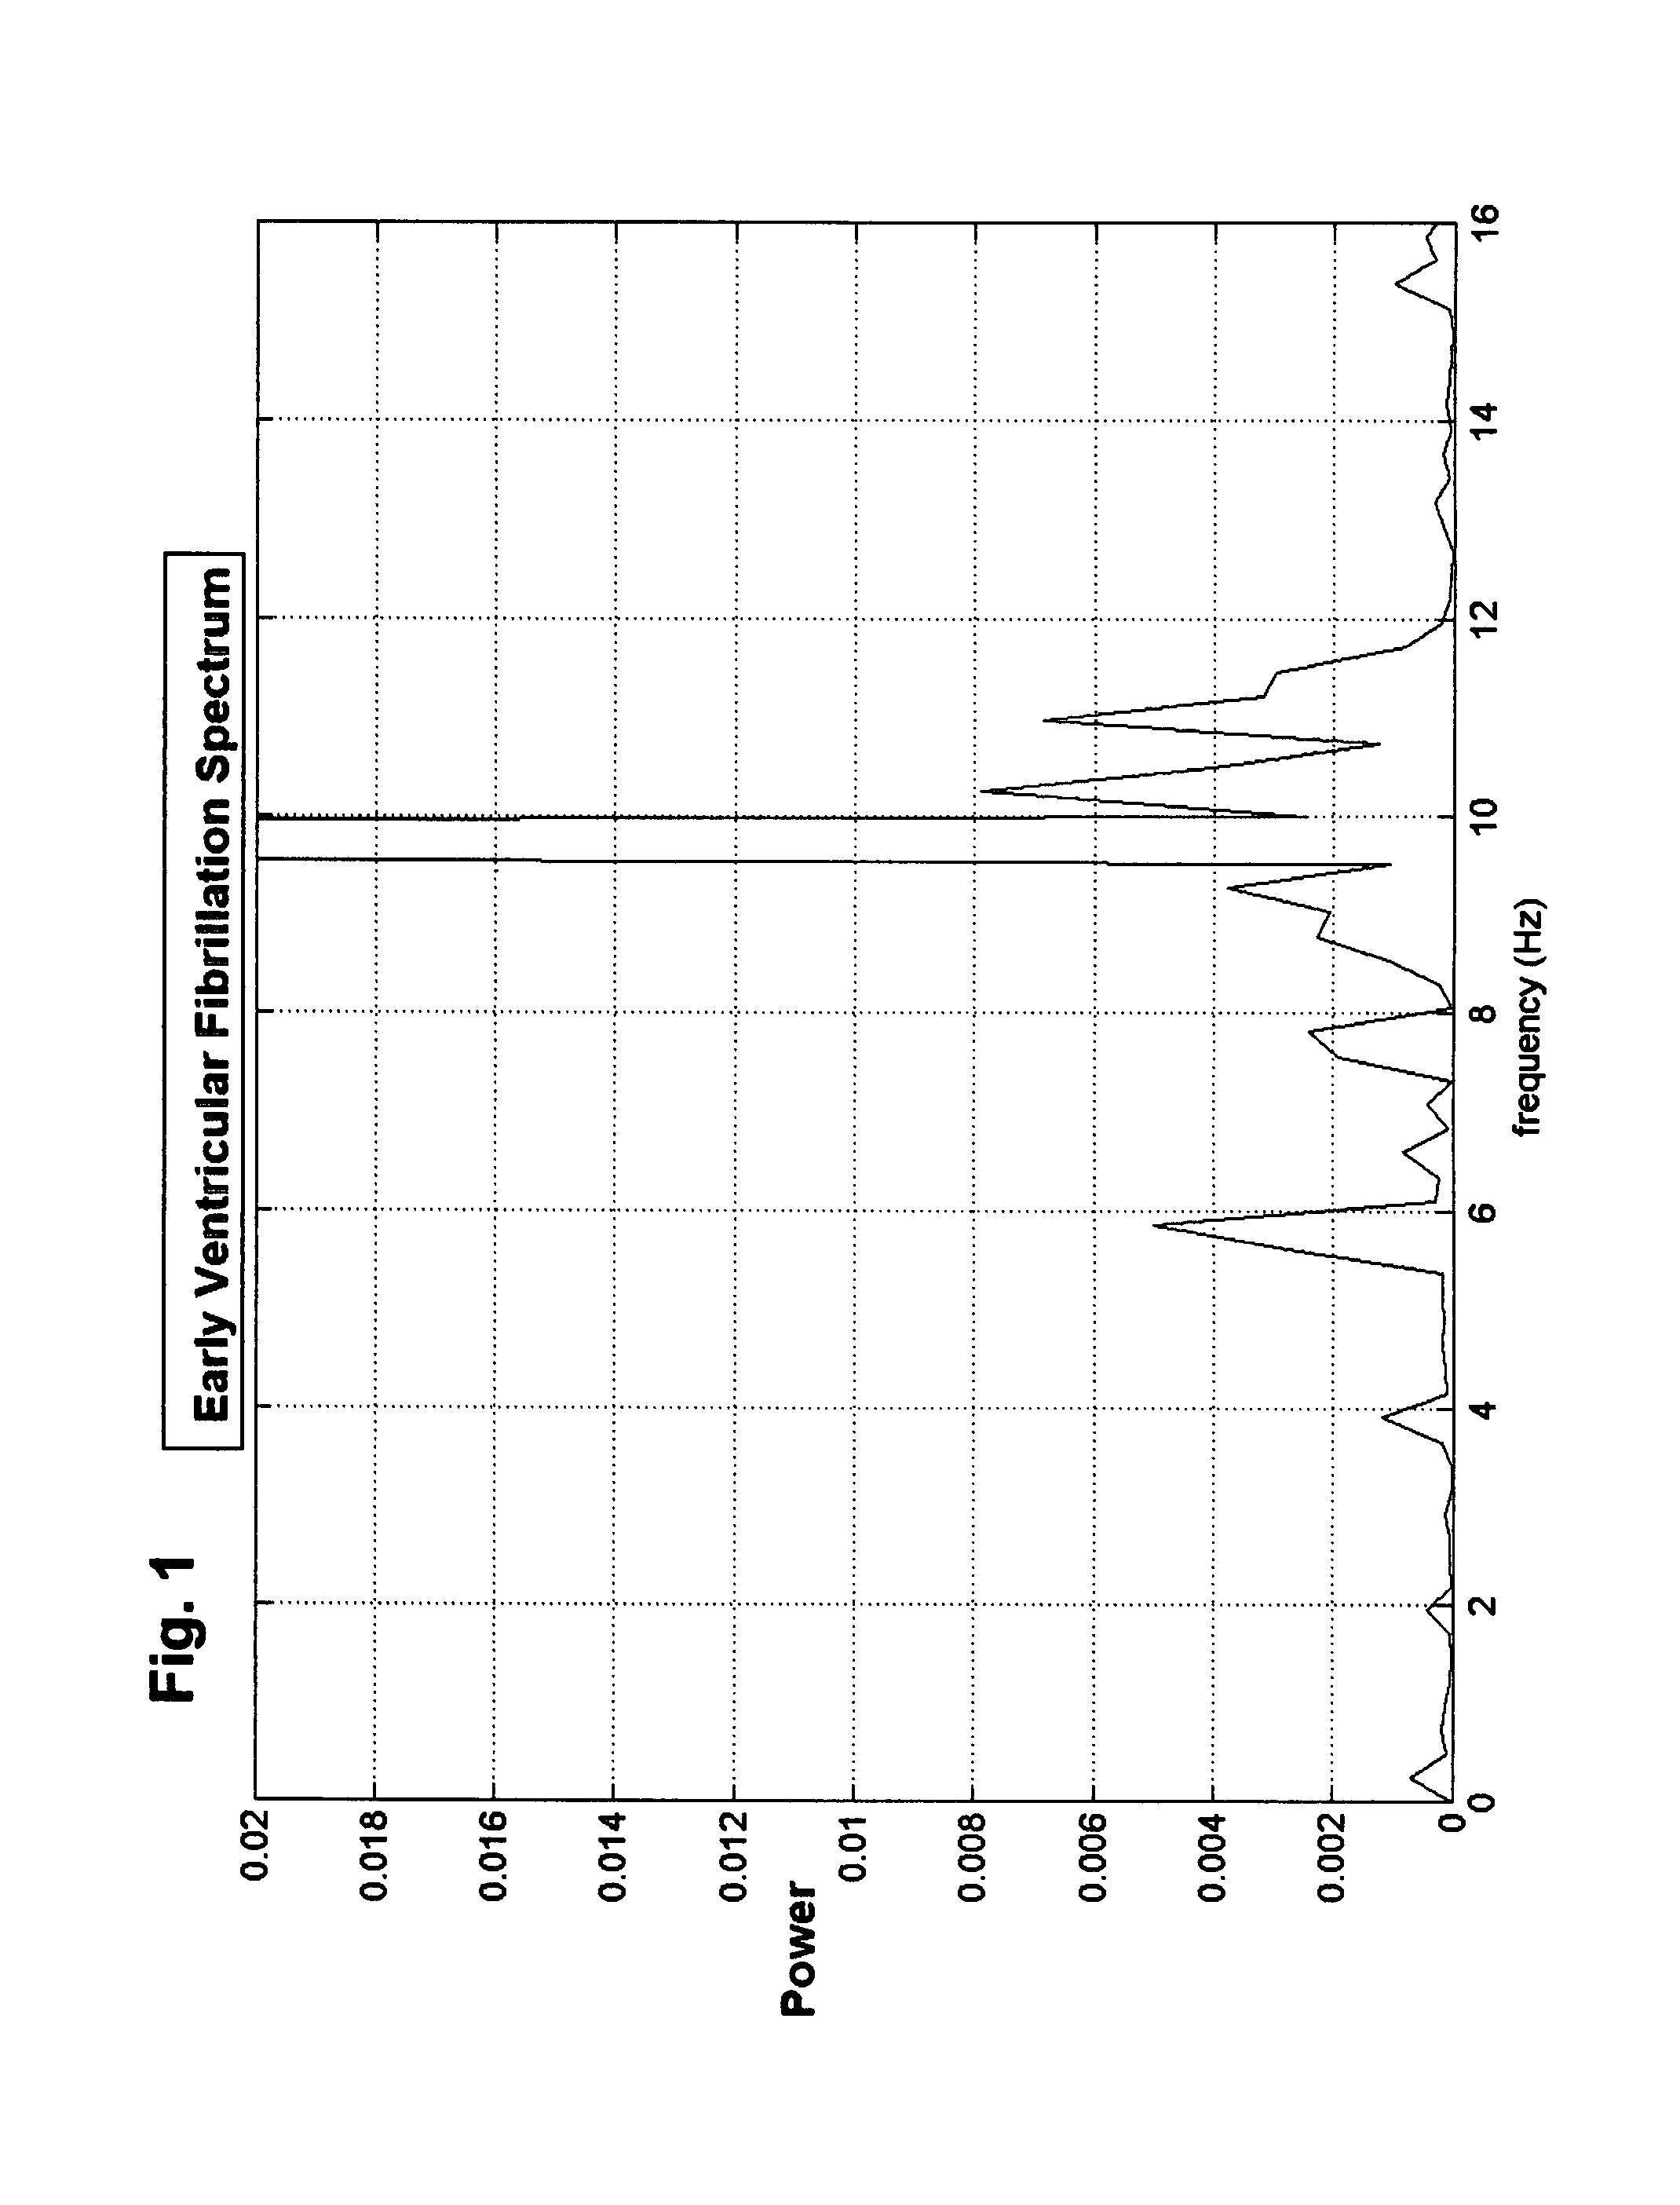 Methods and devices to guide therapy for ventricular fibrillation based on waveform analysis and survival benefit analysis